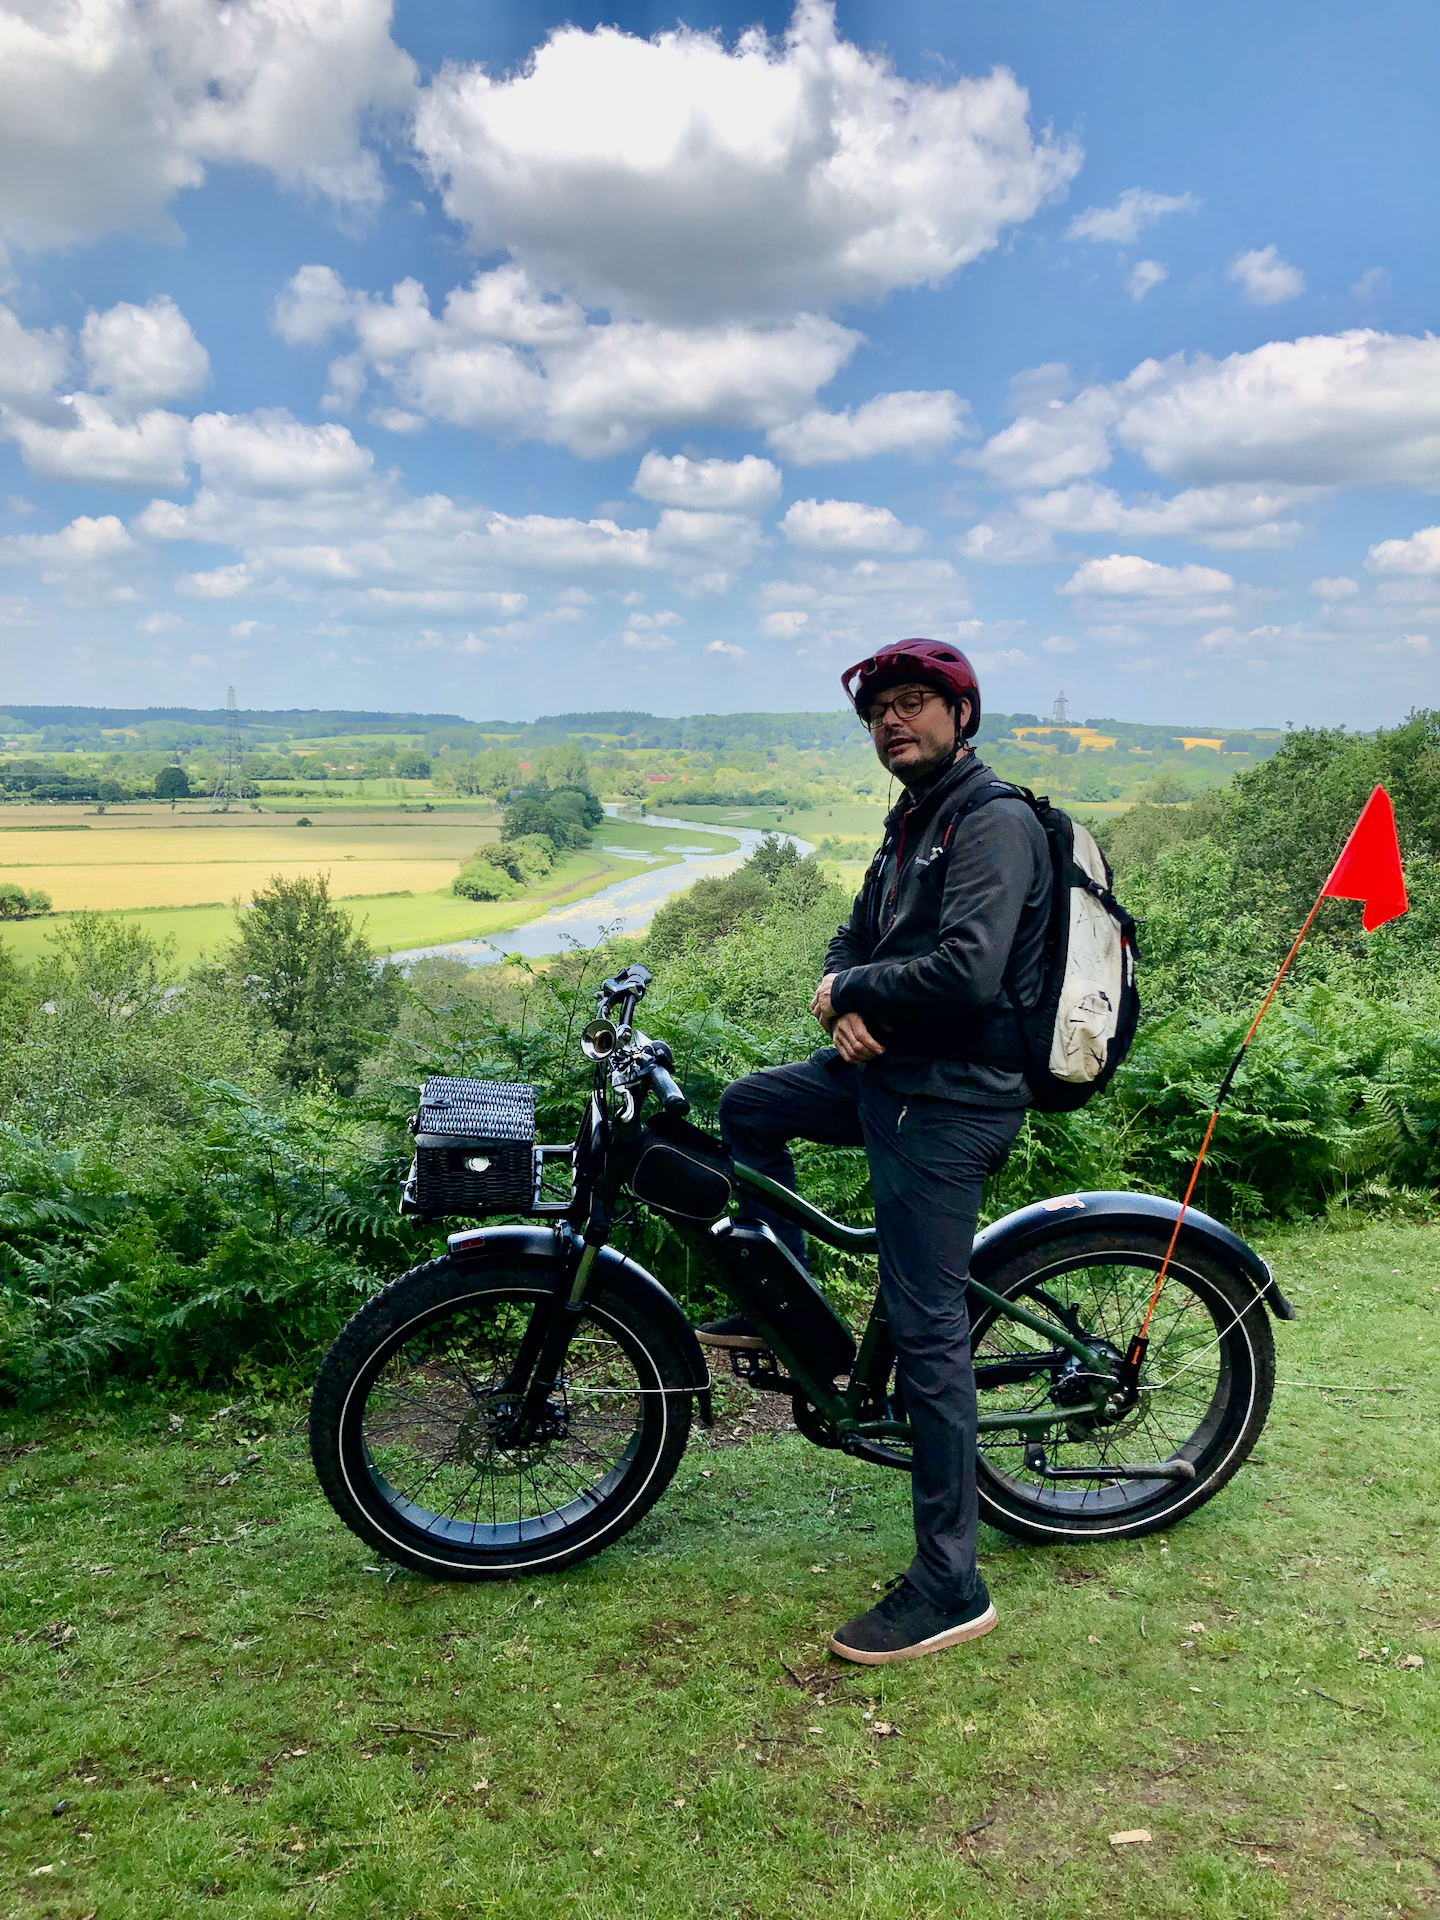 Electric bike ride views with Likie Bikie. Just one of the wonderful New Forest sights you'll see on the escorted 2 hour Explorer Ride